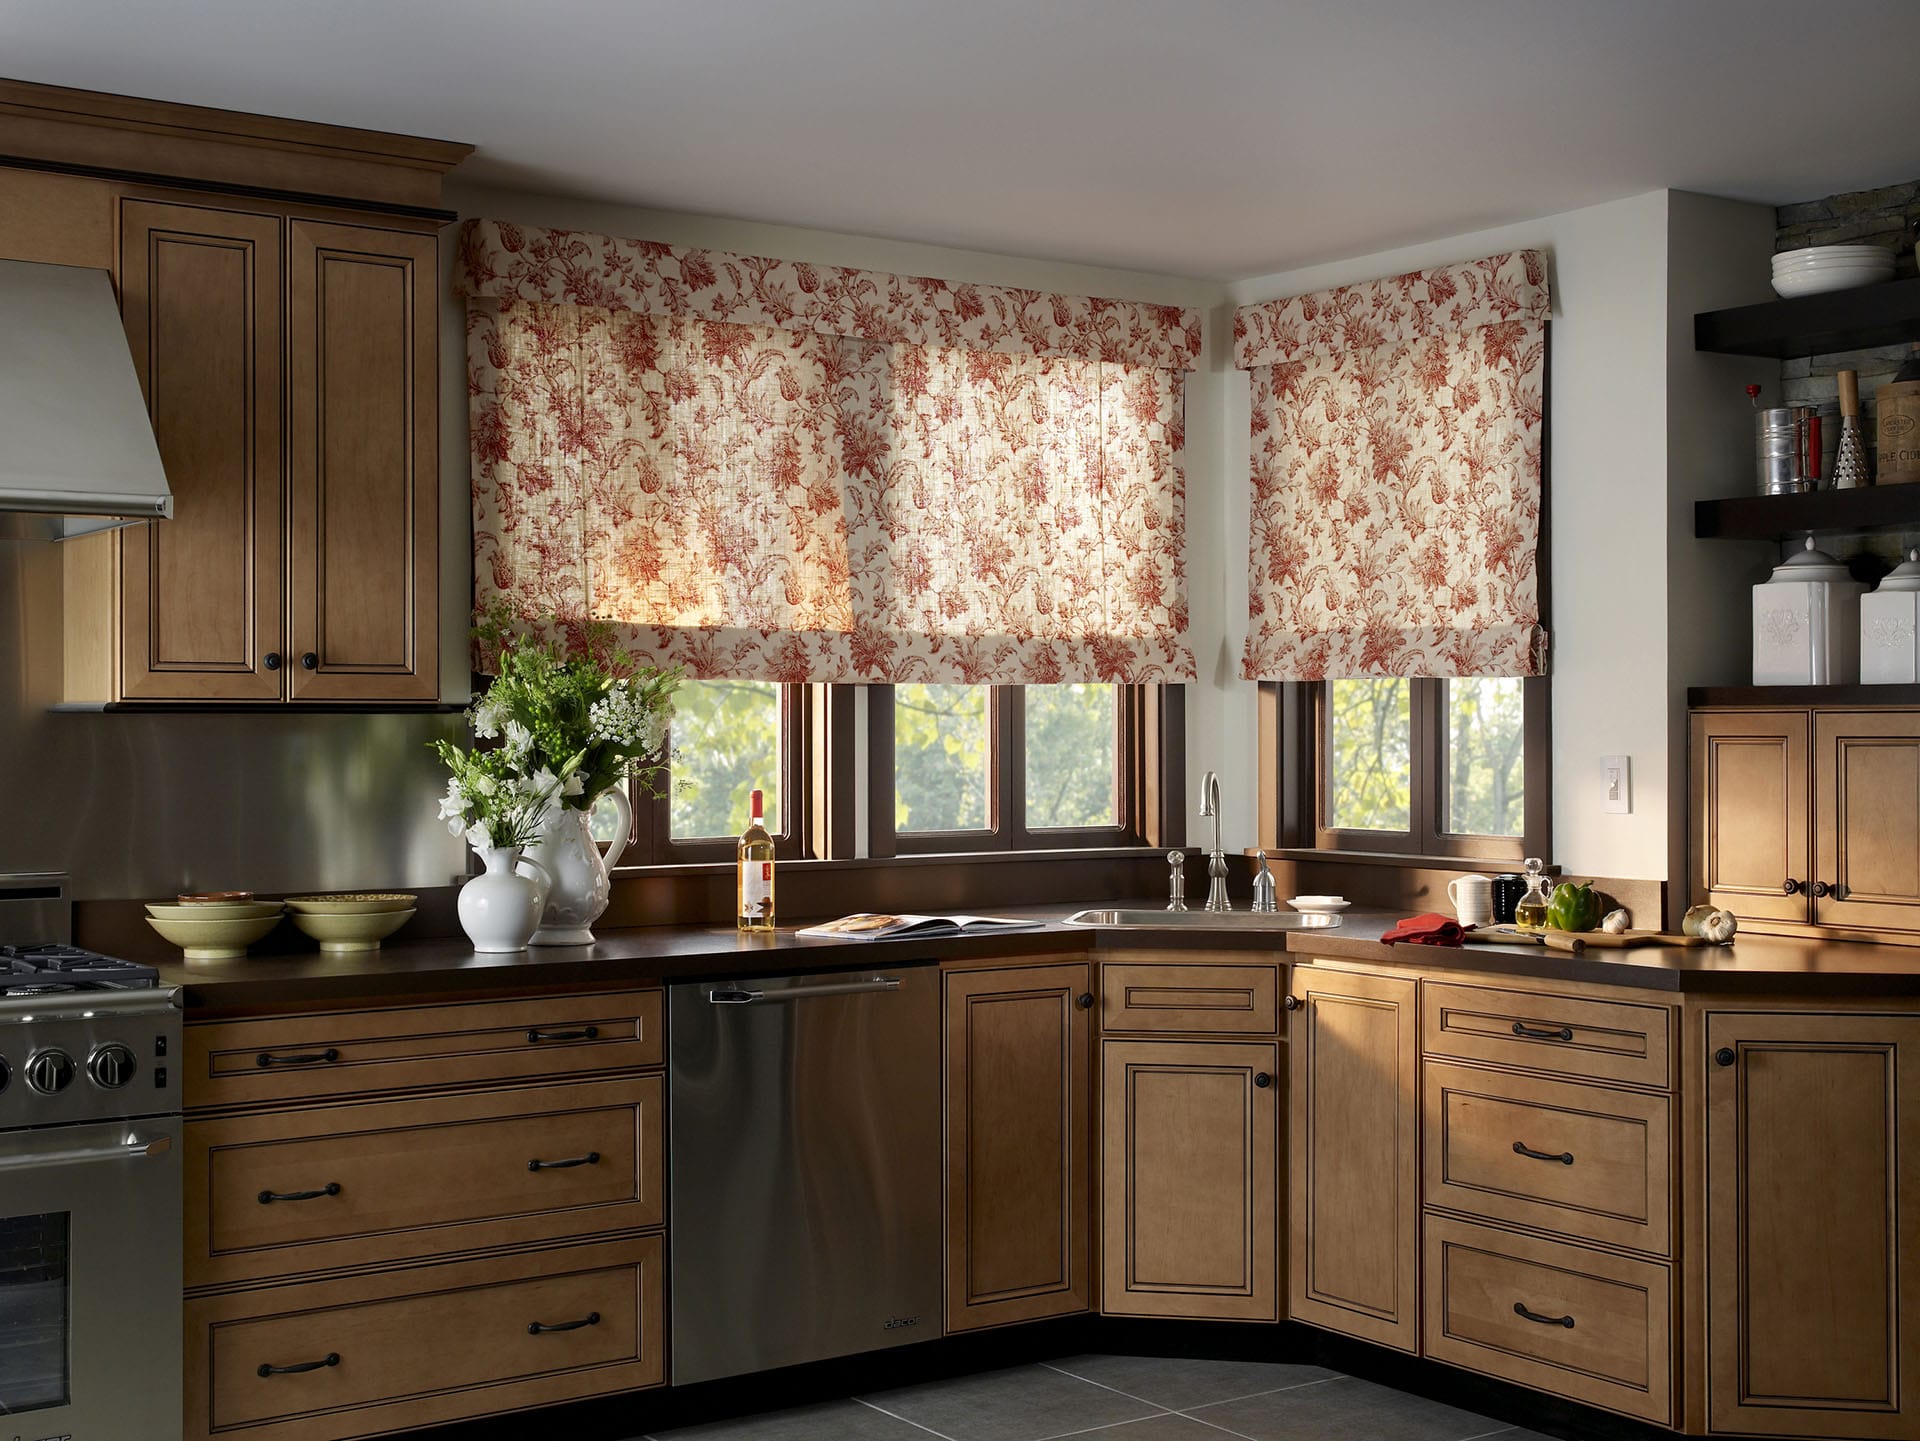 Guidelines for Choosing a Window Treatment